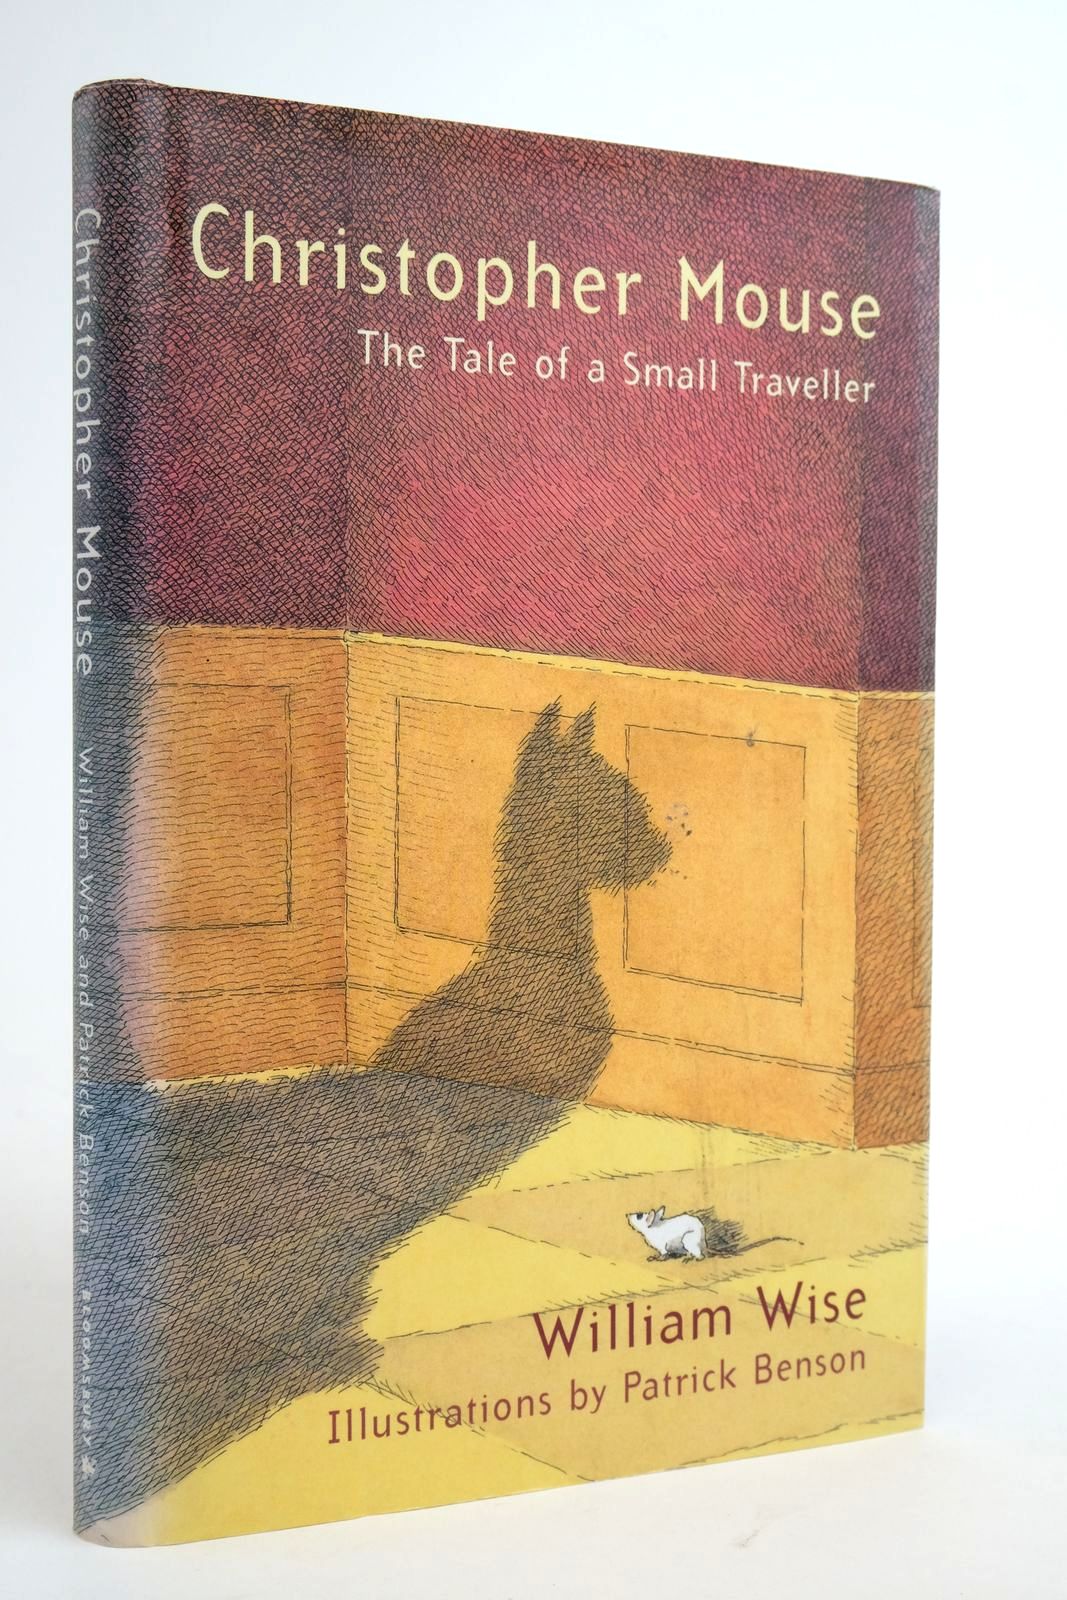 Photo of CHRISTOPHER MOUSE: THE TALE OF A SMALL TRAVELLER written by Wise, William illustrated by Benson, Patrick published by Bloomsbury Children's Books (STOCK CODE: 2136297)  for sale by Stella & Rose's Books